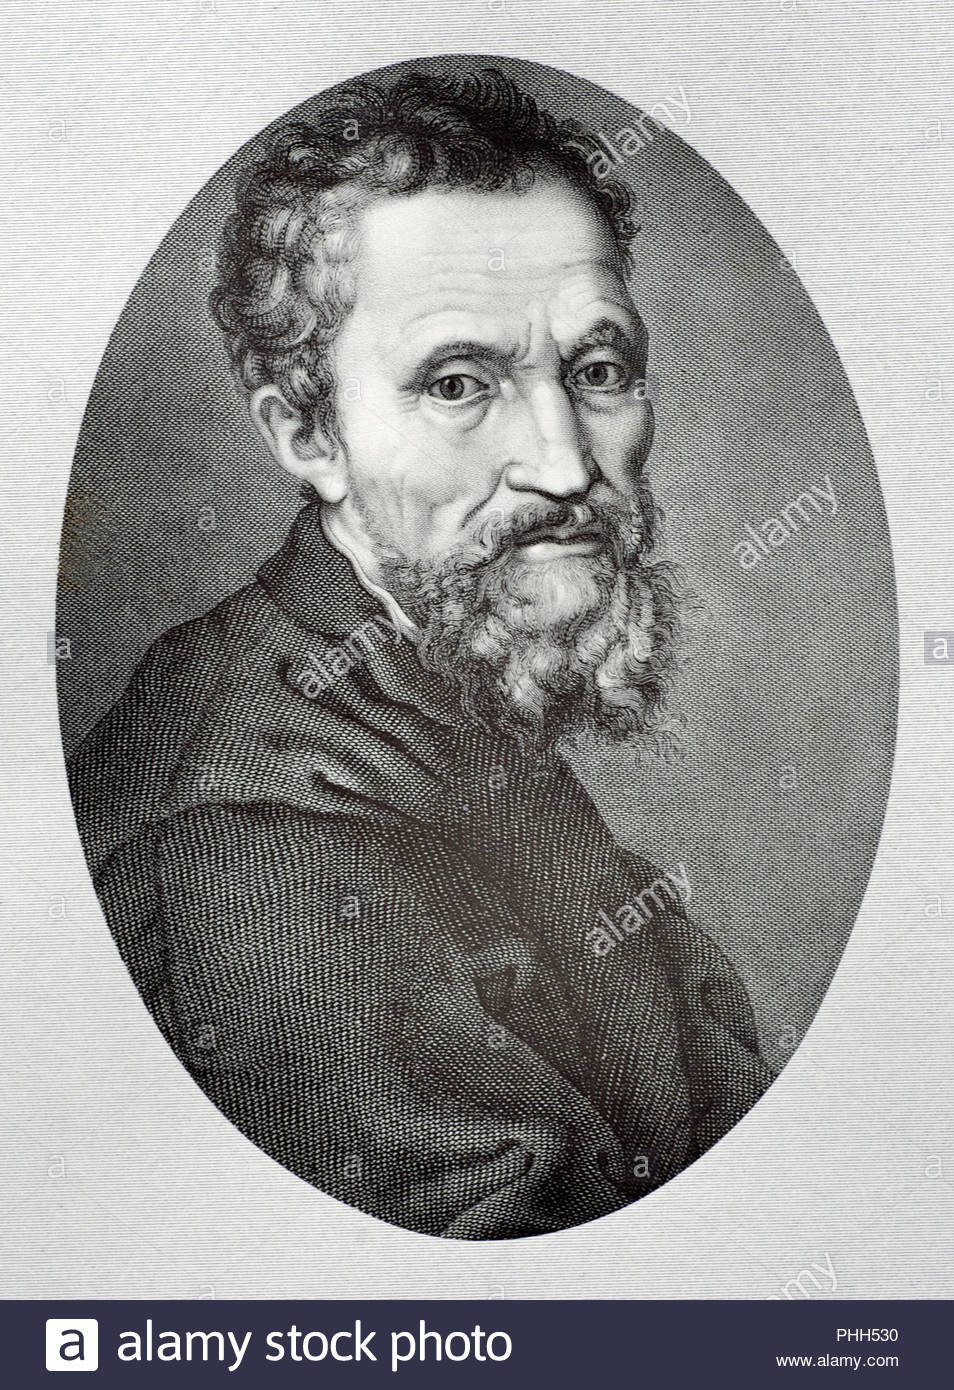 Michelangelo di Lodovico Buonarroti Simoni or more commonly known by his first name Michelangelo 1475 –  1564 was an Italian sculptor, painter, architect and poet of the High Renaissance born in the Republic of Florence, who exerted an unparalleled influence on the development of Western art, antique illustration from 1880 Stock Photo